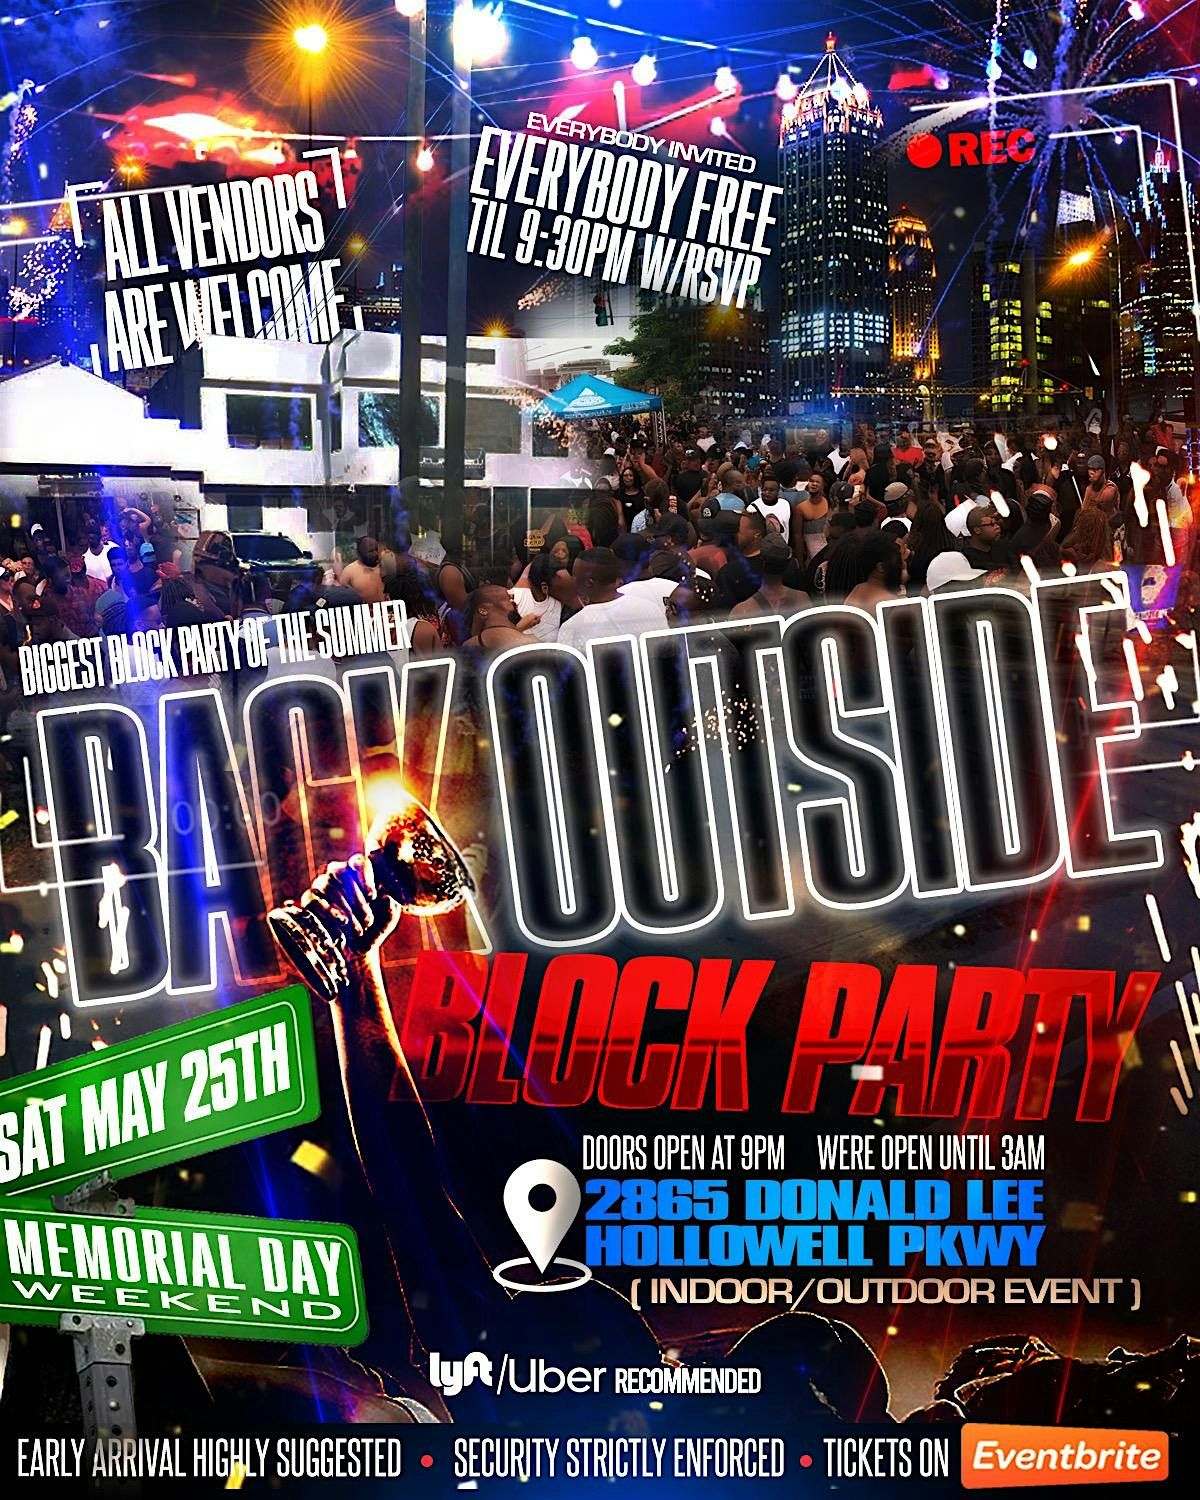 BACK OUTSIDE BLOCK PARTY SATURDAY MAY 25TH MEMORIAL WEEKEND (FREE TICKET)